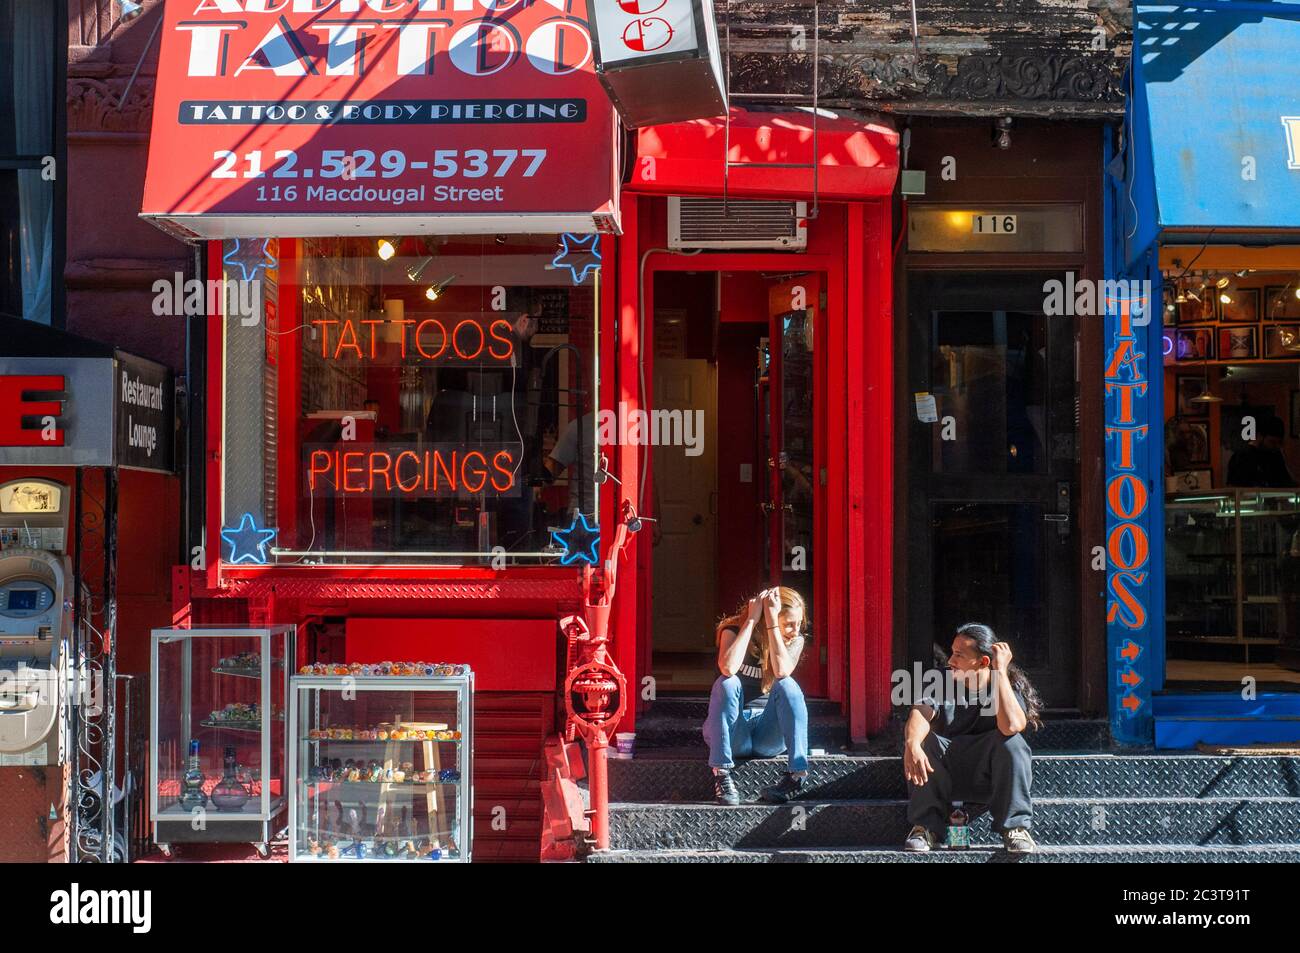 12 Best Tattoo Shops in NYC for Top Level Tats